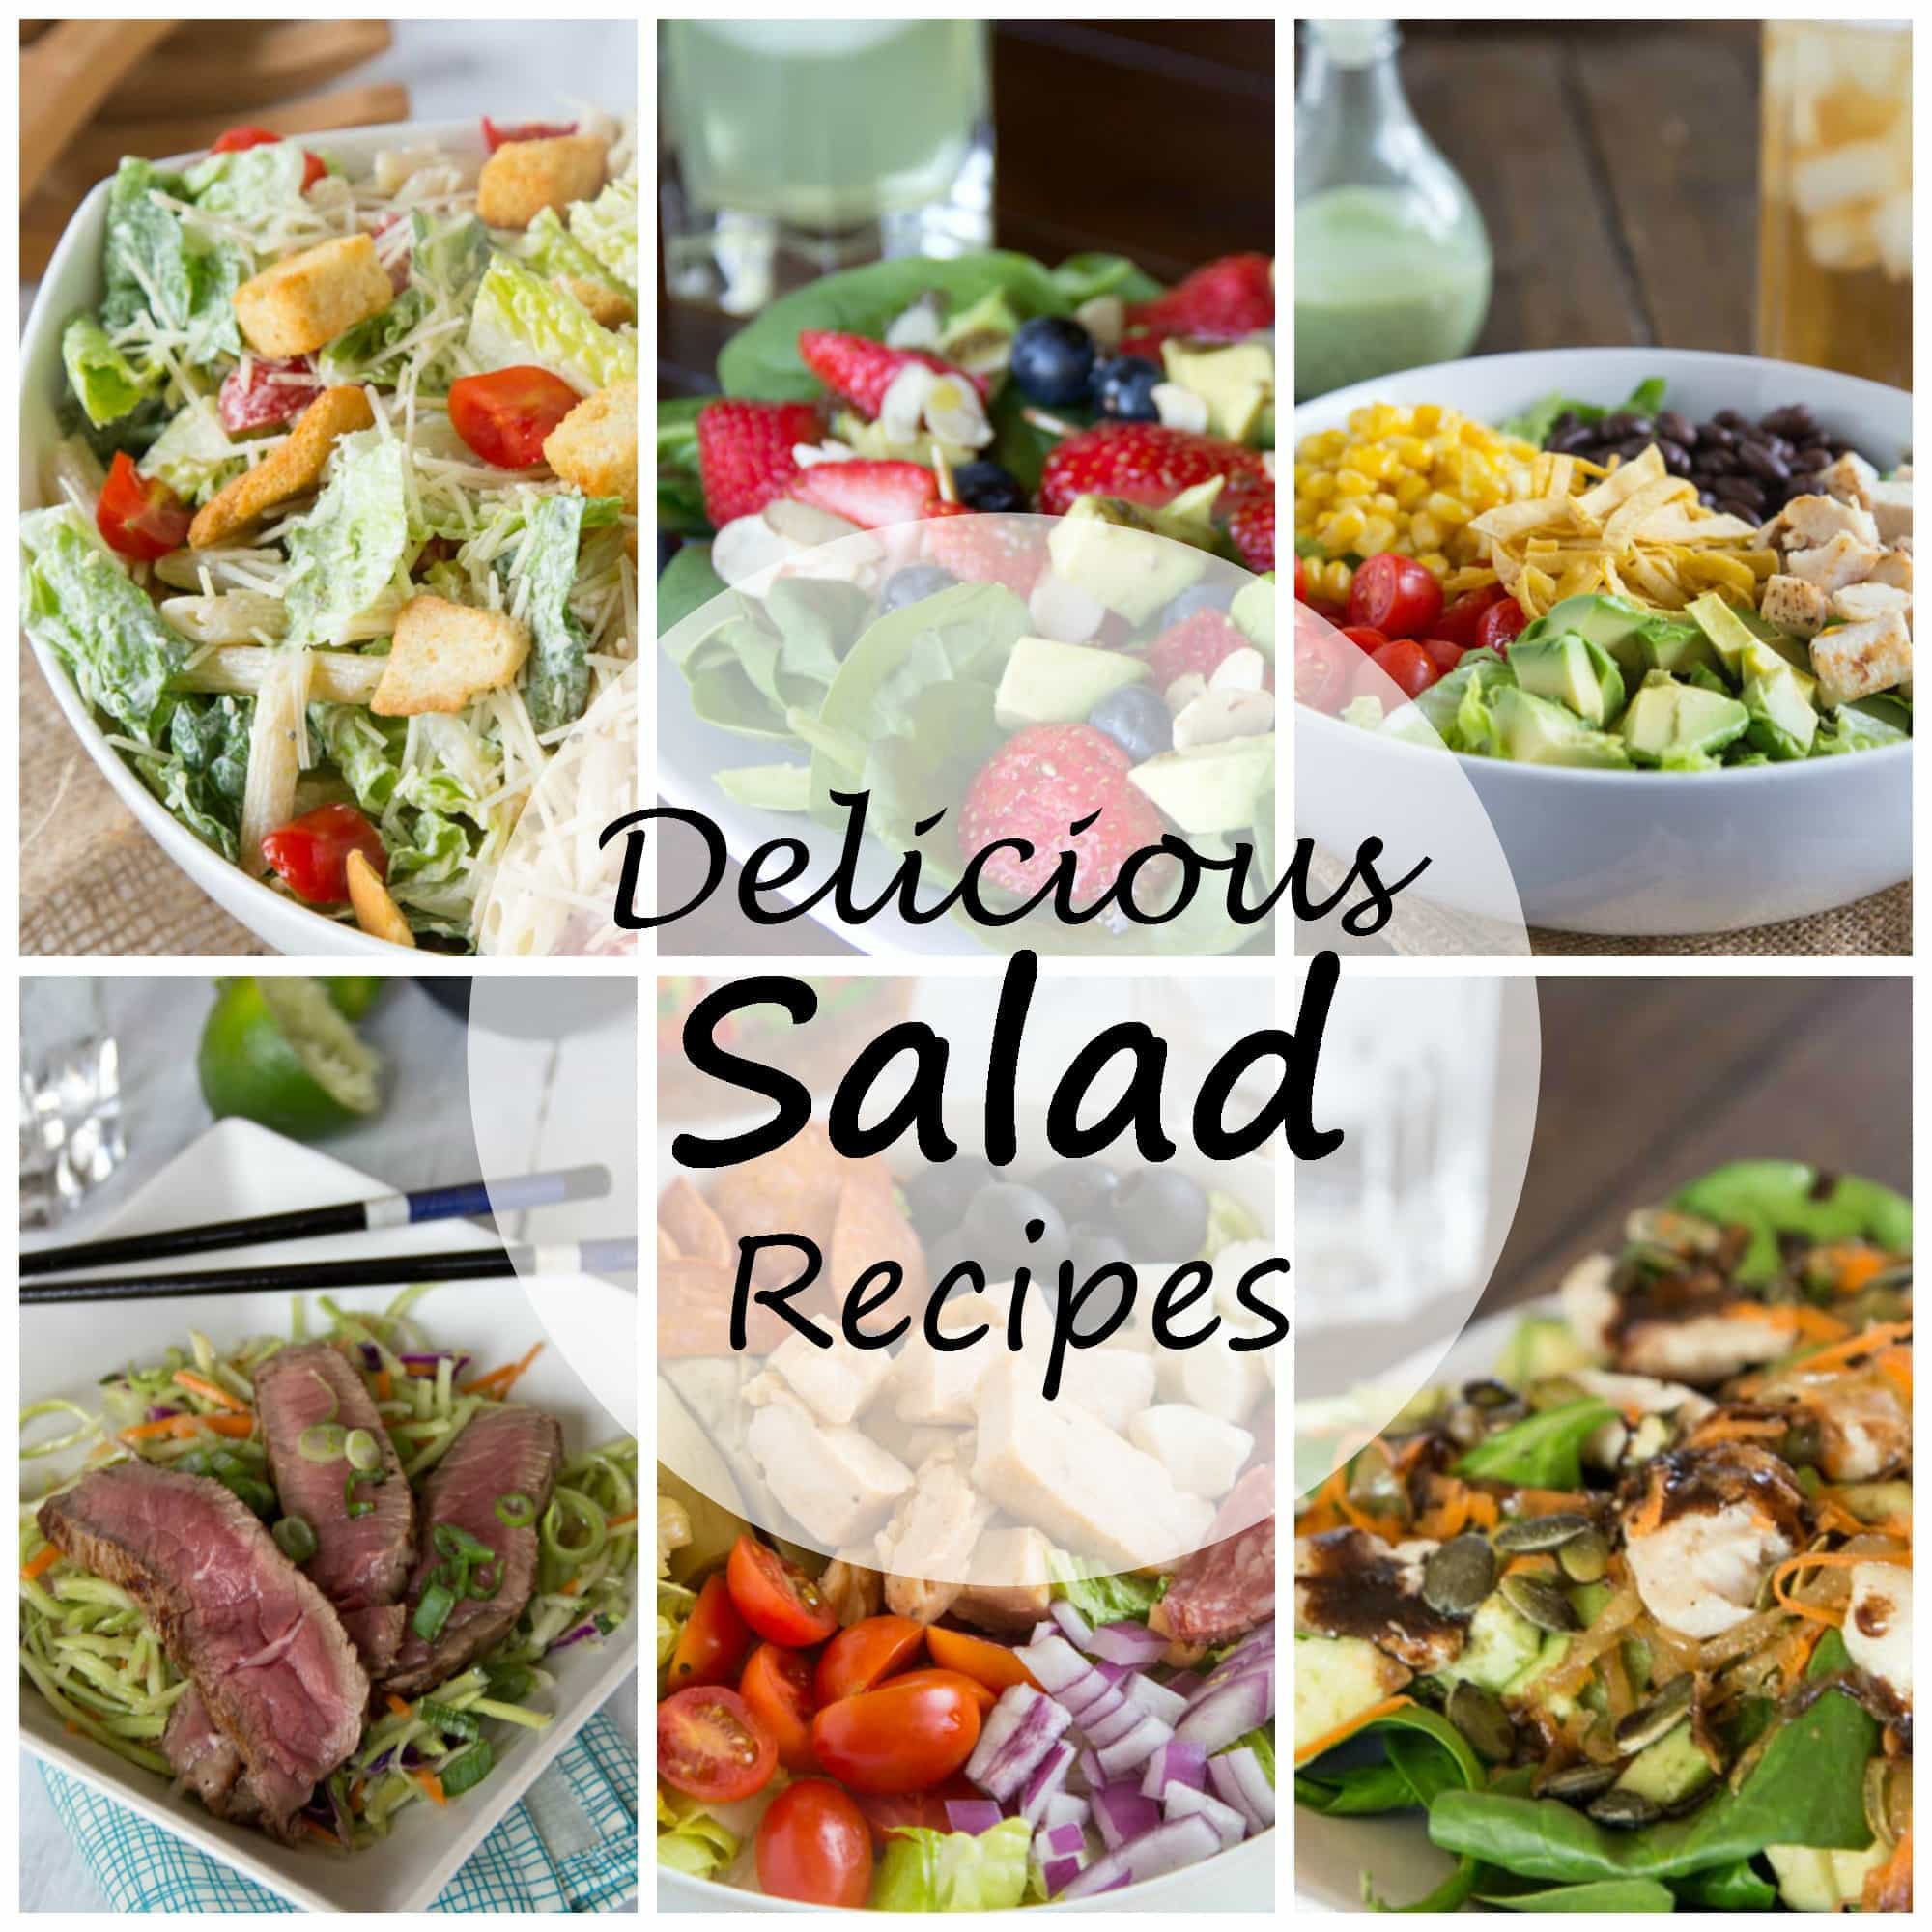 Salad Recipes - 13 Salad Recipes that are healthy, but still satisfy. You don't have to feel like you are dieting to get your veggies and eat healthy!